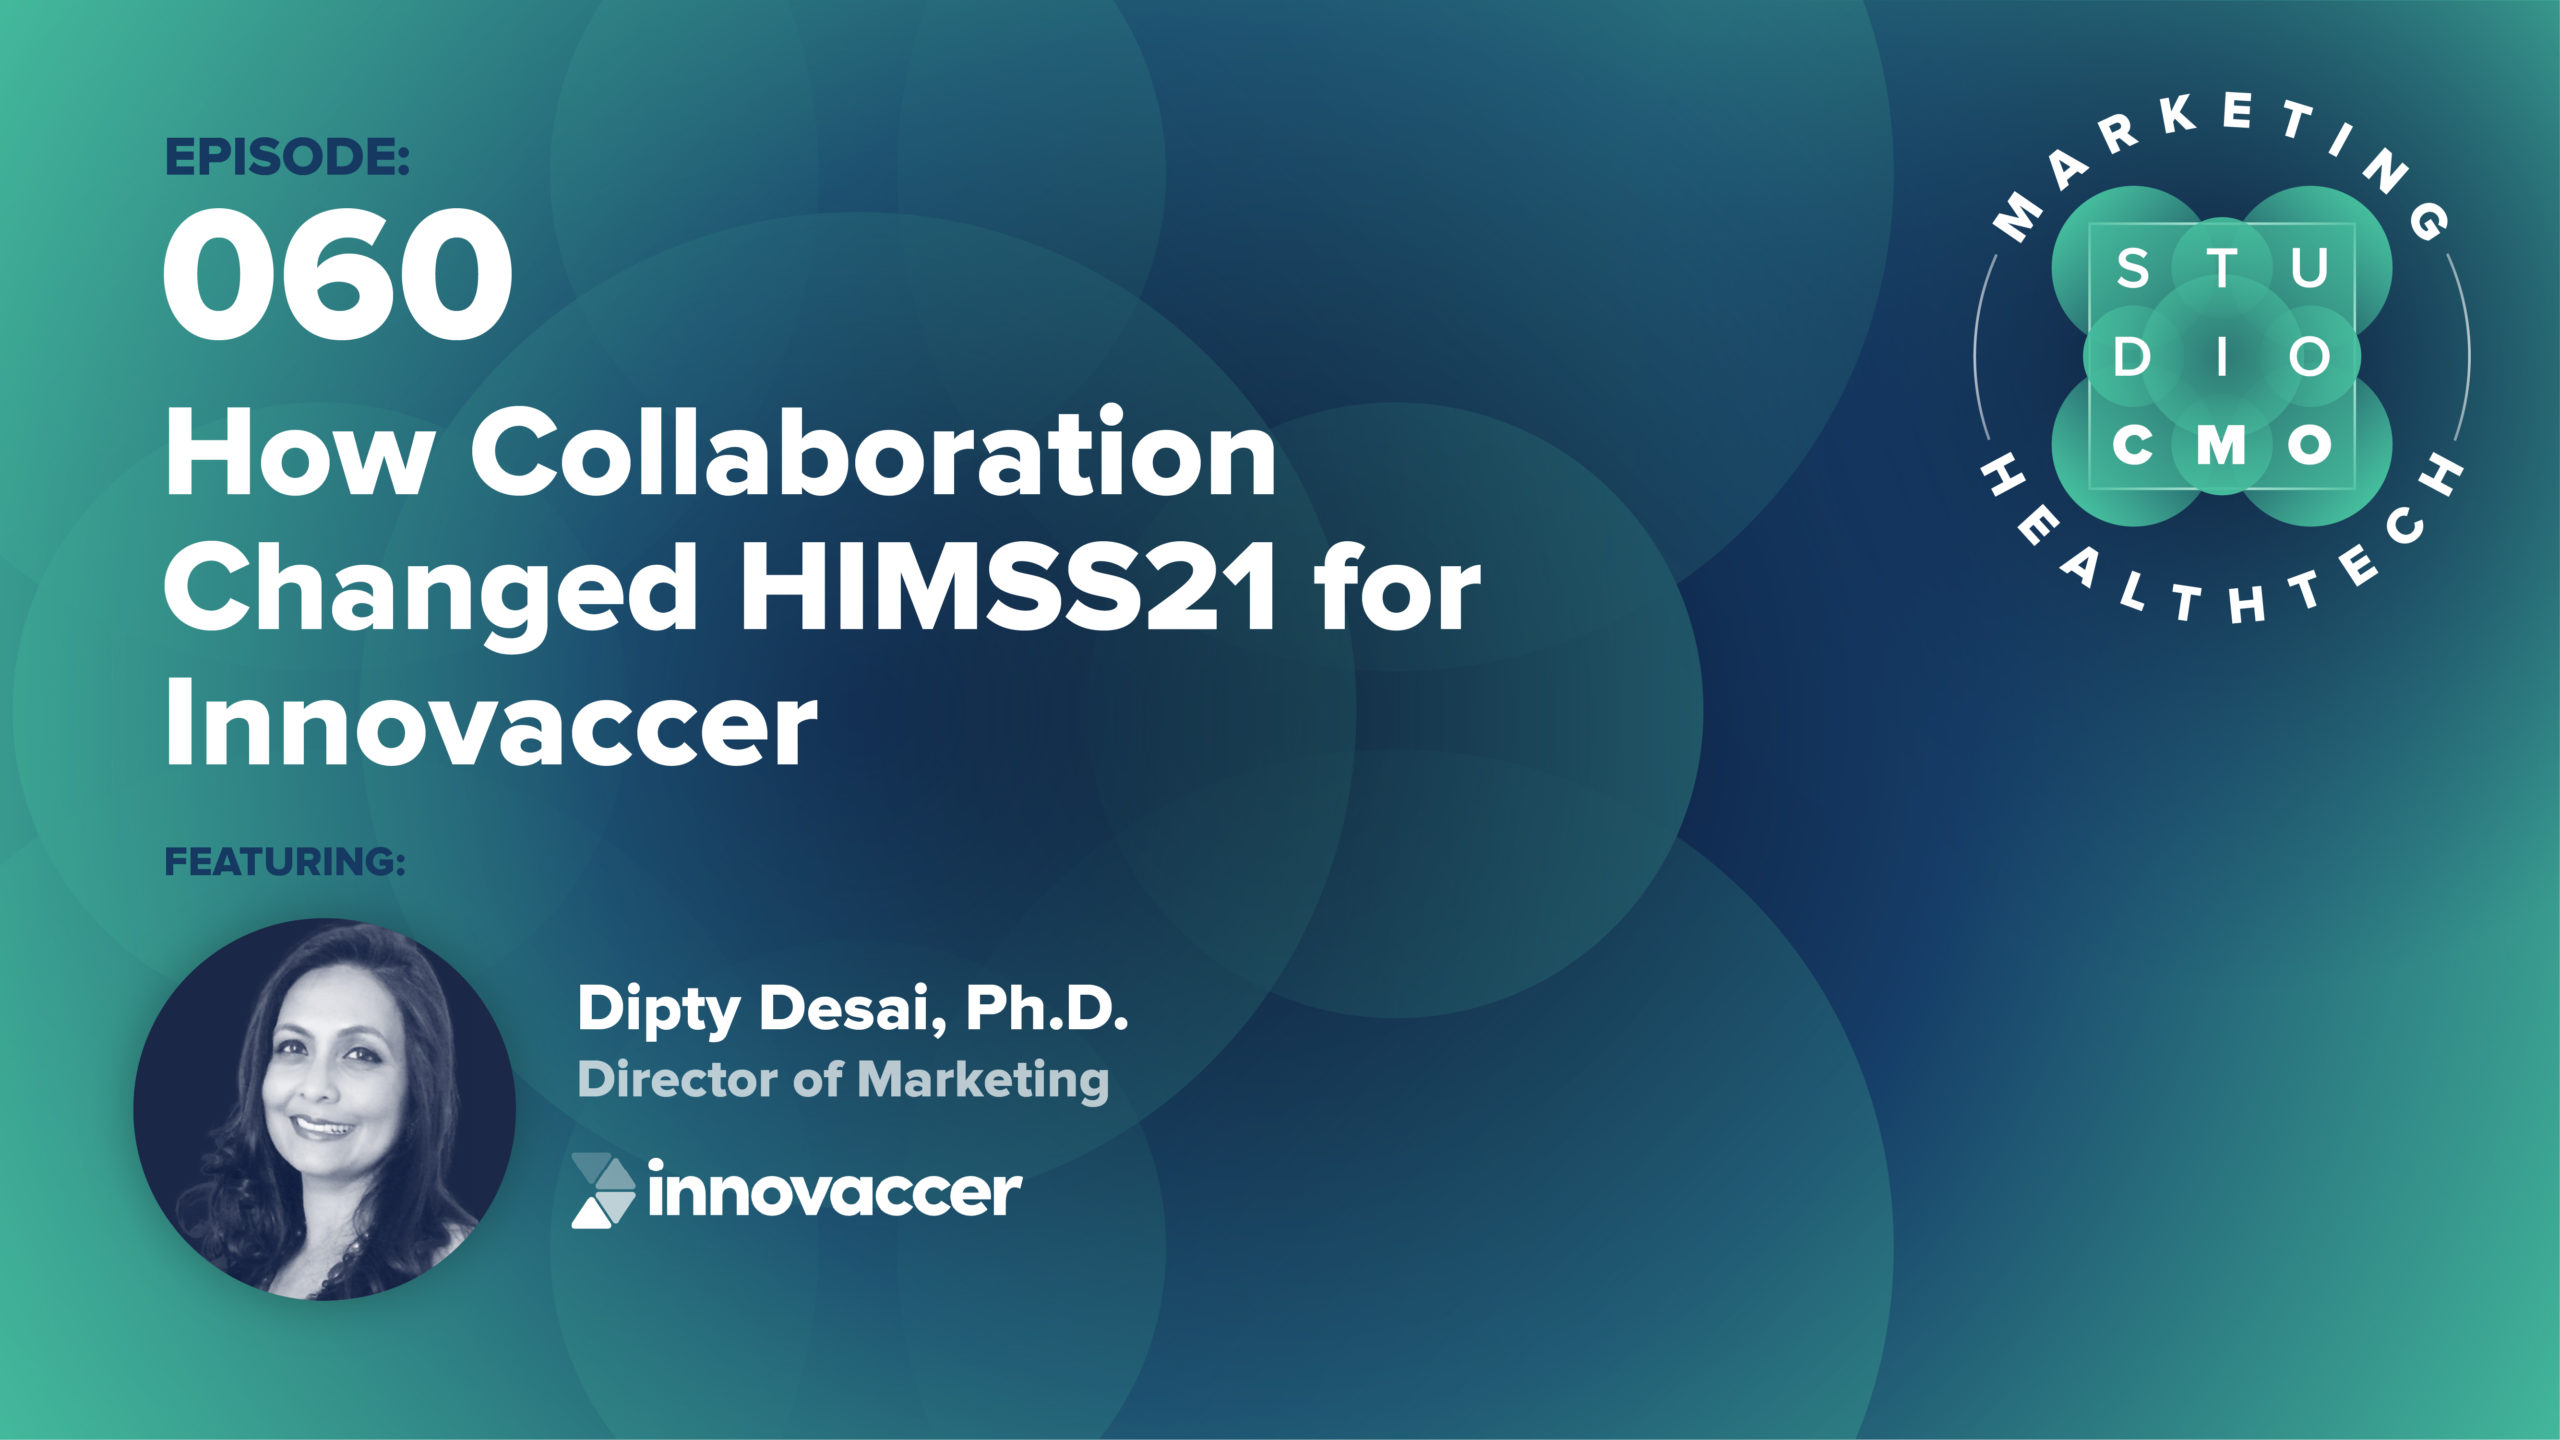 Will live events return after the Delta variant? How can your HealthTech ensure trade show success? Innovaccer's plan for HIMSS is a case study for you.